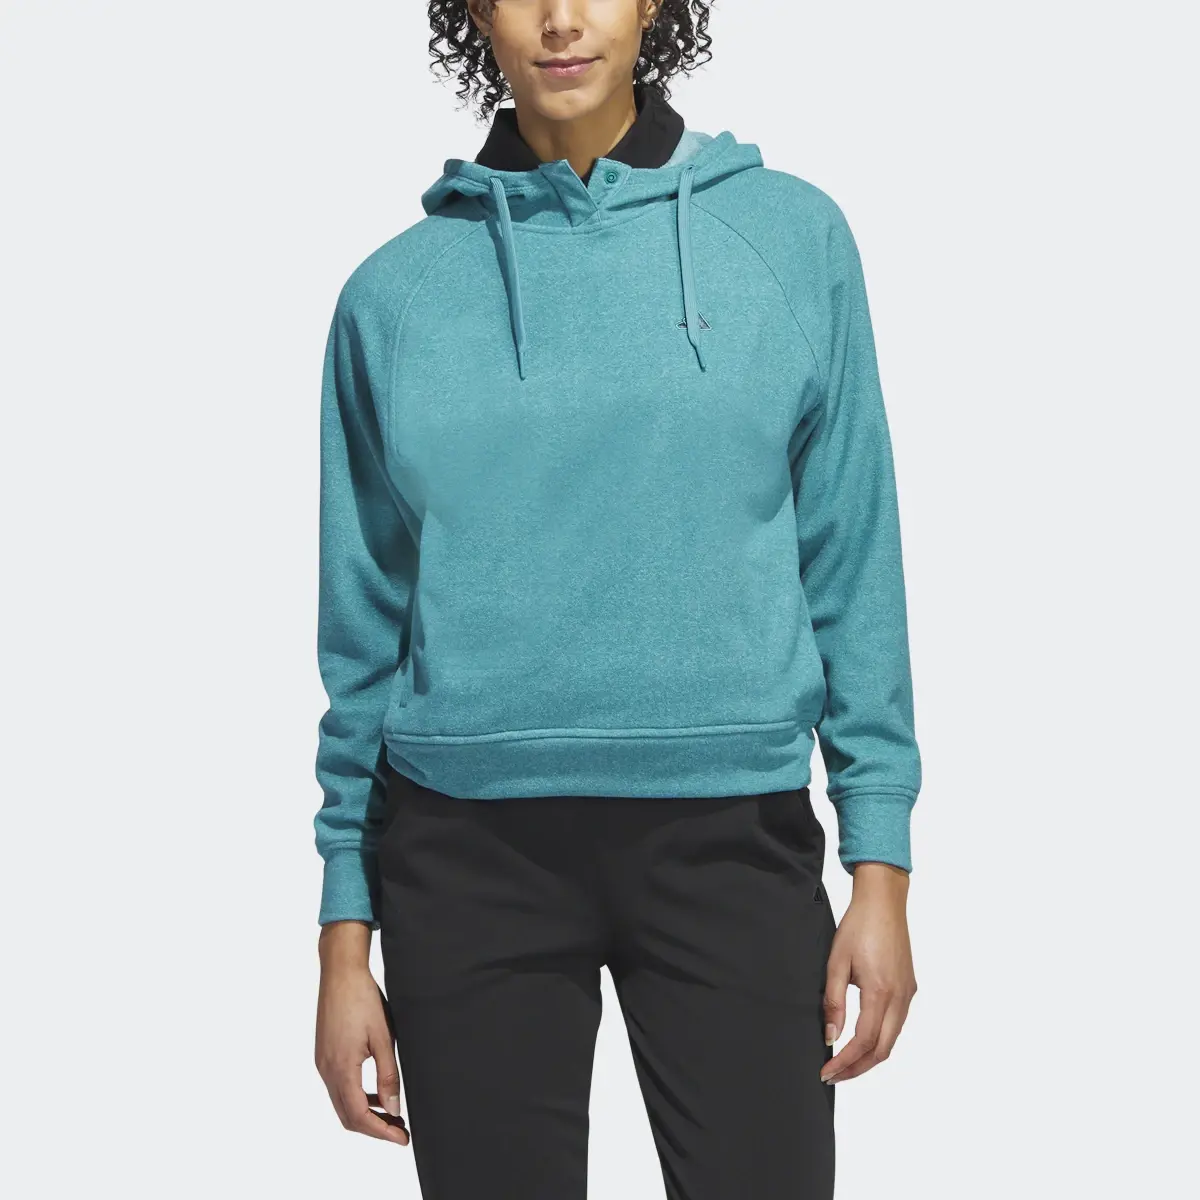 Adidas Go-To Hoodie. 1